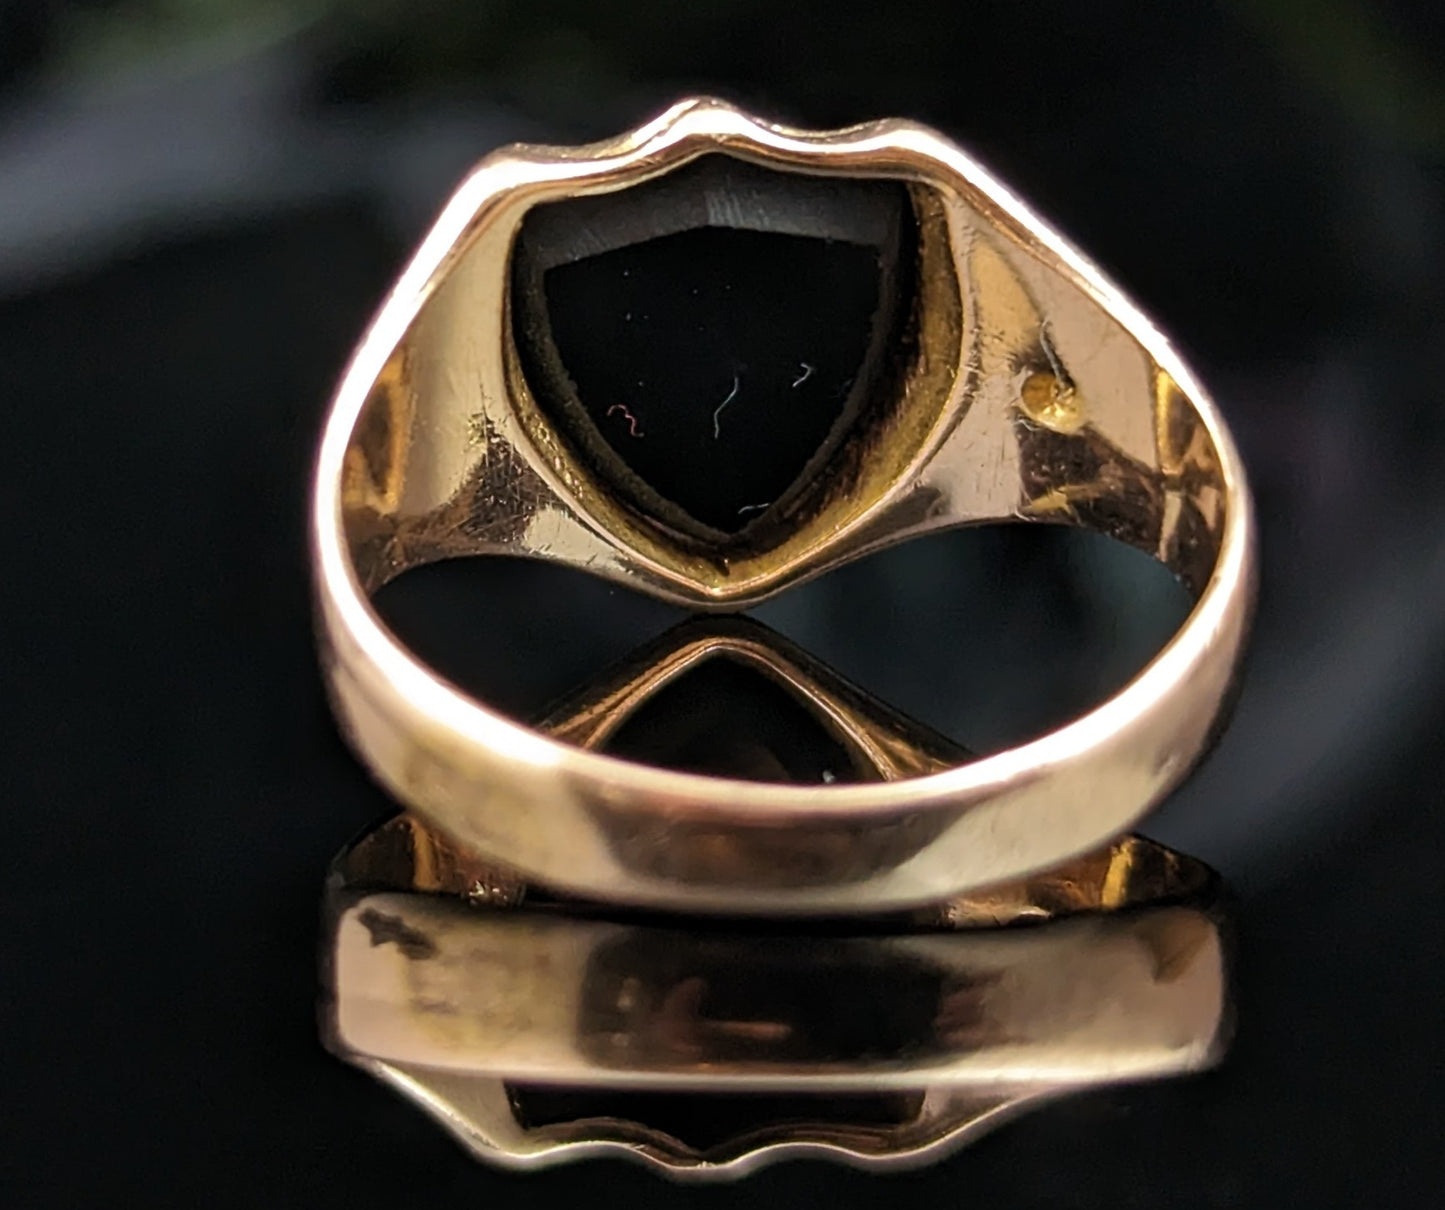 Antique 15ct Rose gold and Onyx signet ring, Shield shaped, pinky, Victorian